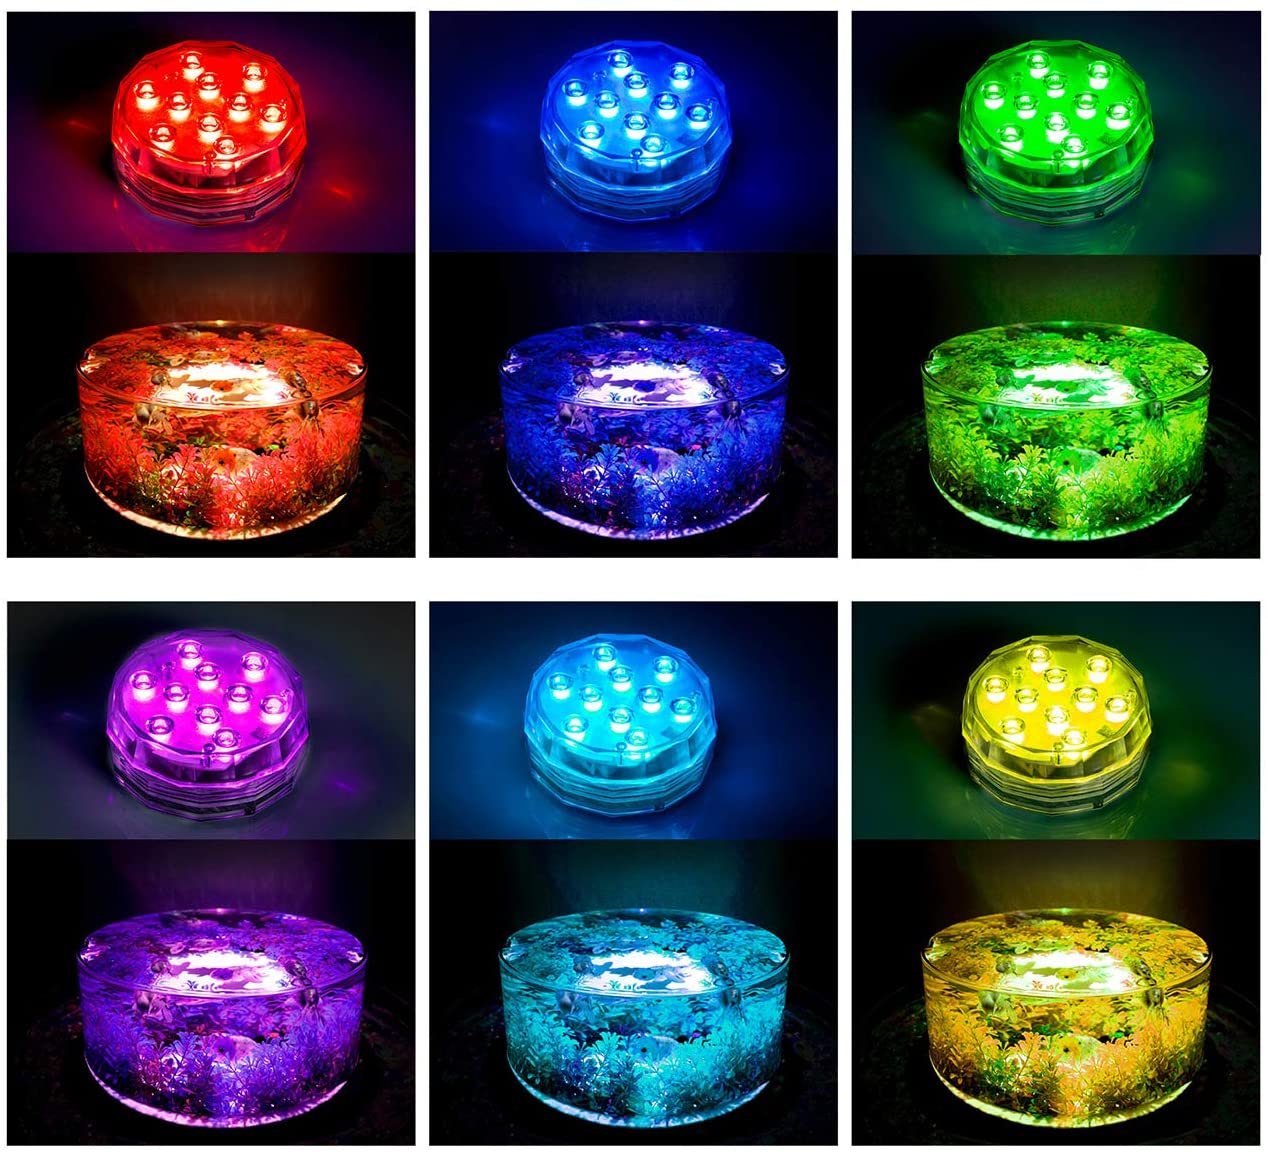 TEPENAR Submersible Led Lights with Remote - Waterproof Underwater Led Light Battery Operated Controlled 16 Color Changing Lamp with 4pcs Suction Cup for Pool Vase Aquarium Decoration 2 Pack